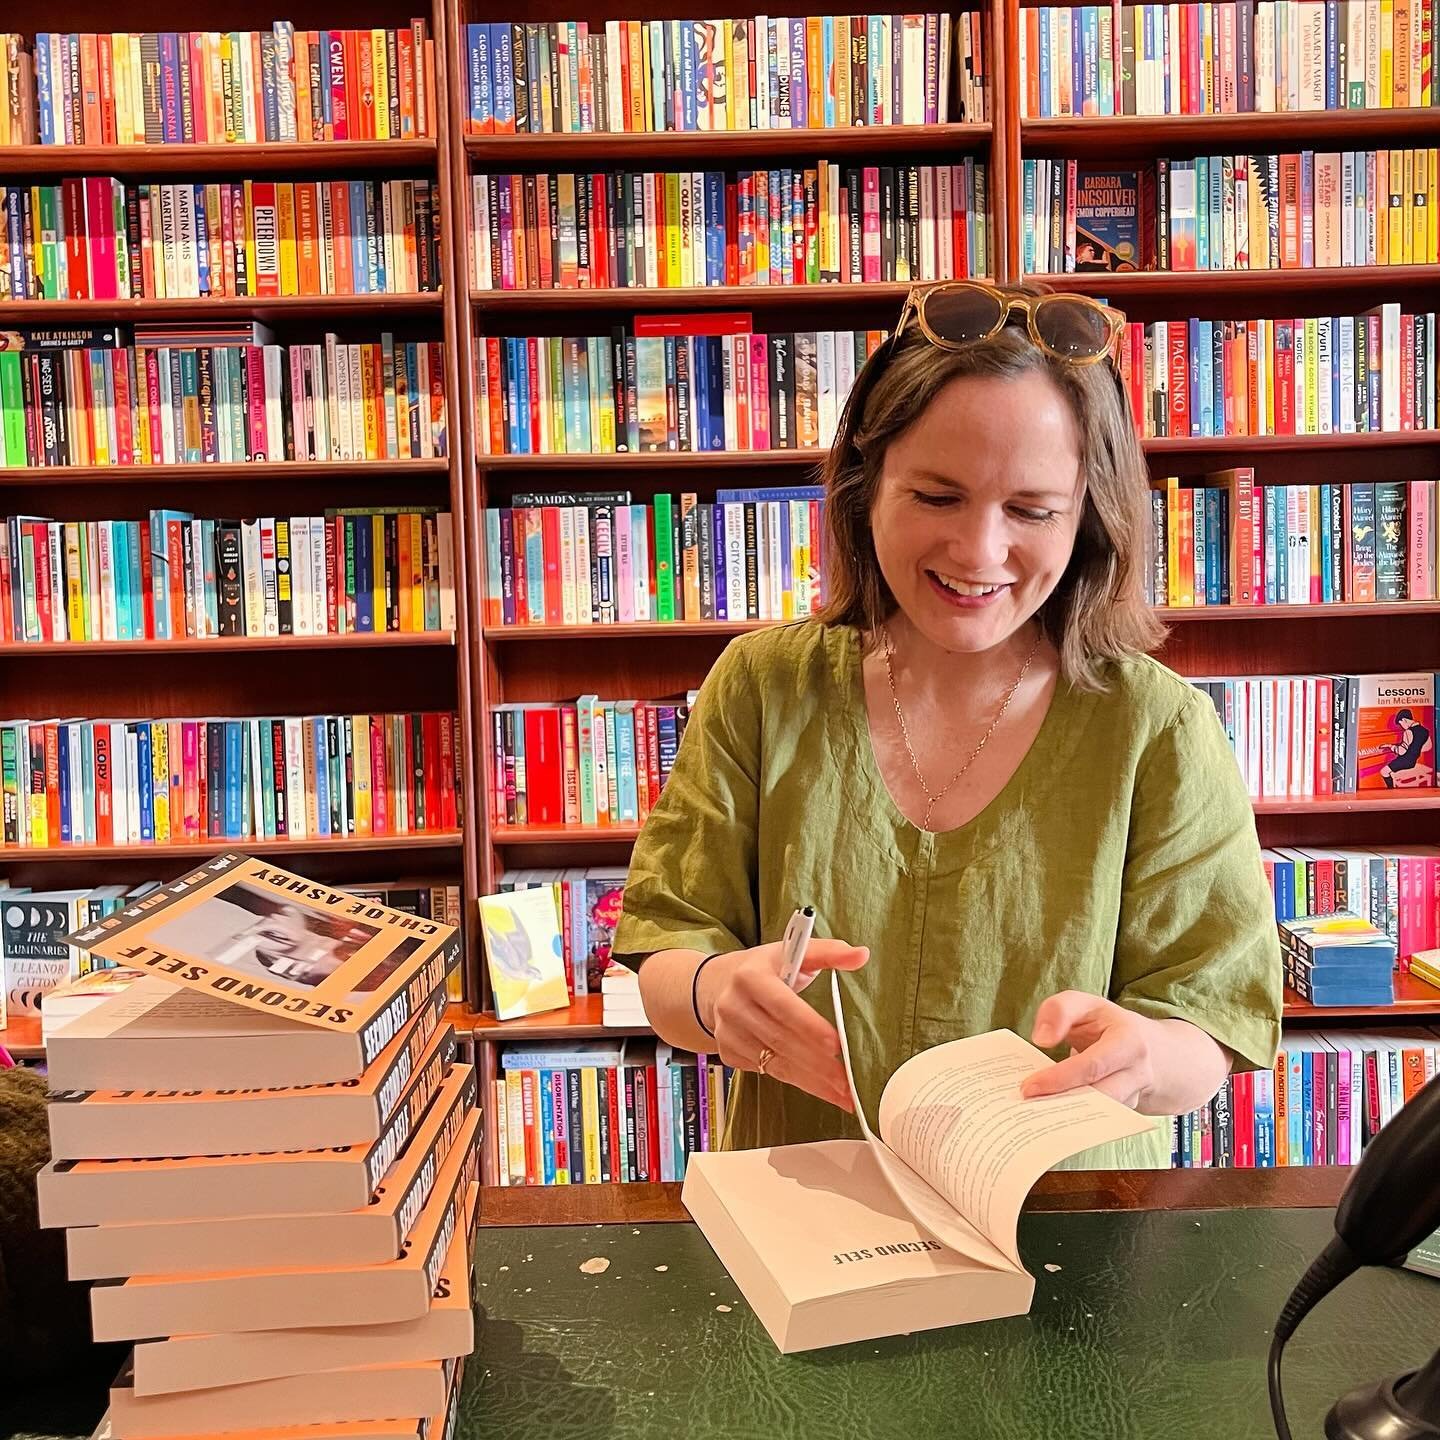 The ever delightful Chlo&euml; Ashby happened to be passing this weekend and signed a whole stack of her brilliant new pb Second Self, a beautiful, thoughtful meditation on life&rsquo;s choices. Come get your signed copy!